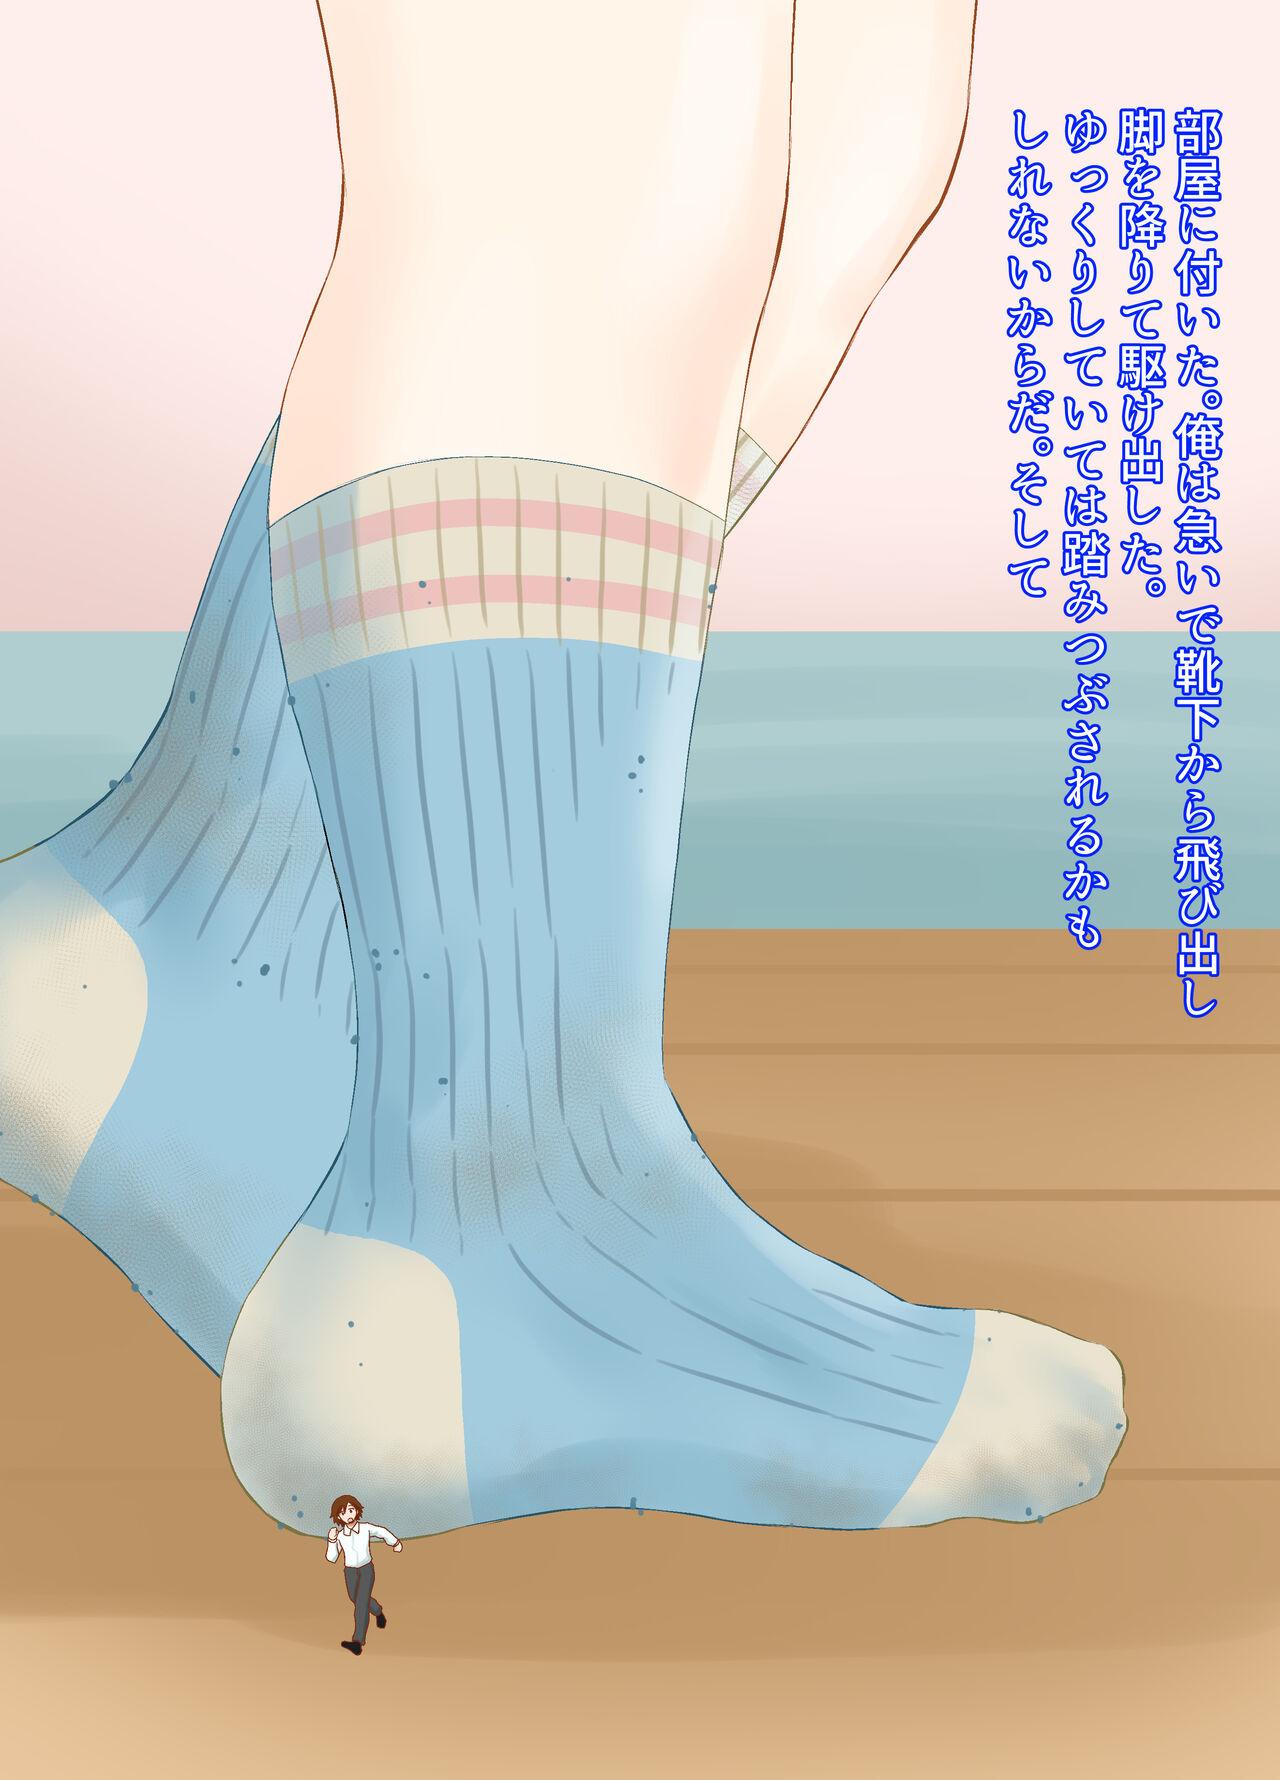 A CG collection of getting smaller and being stepped on by a girl 10